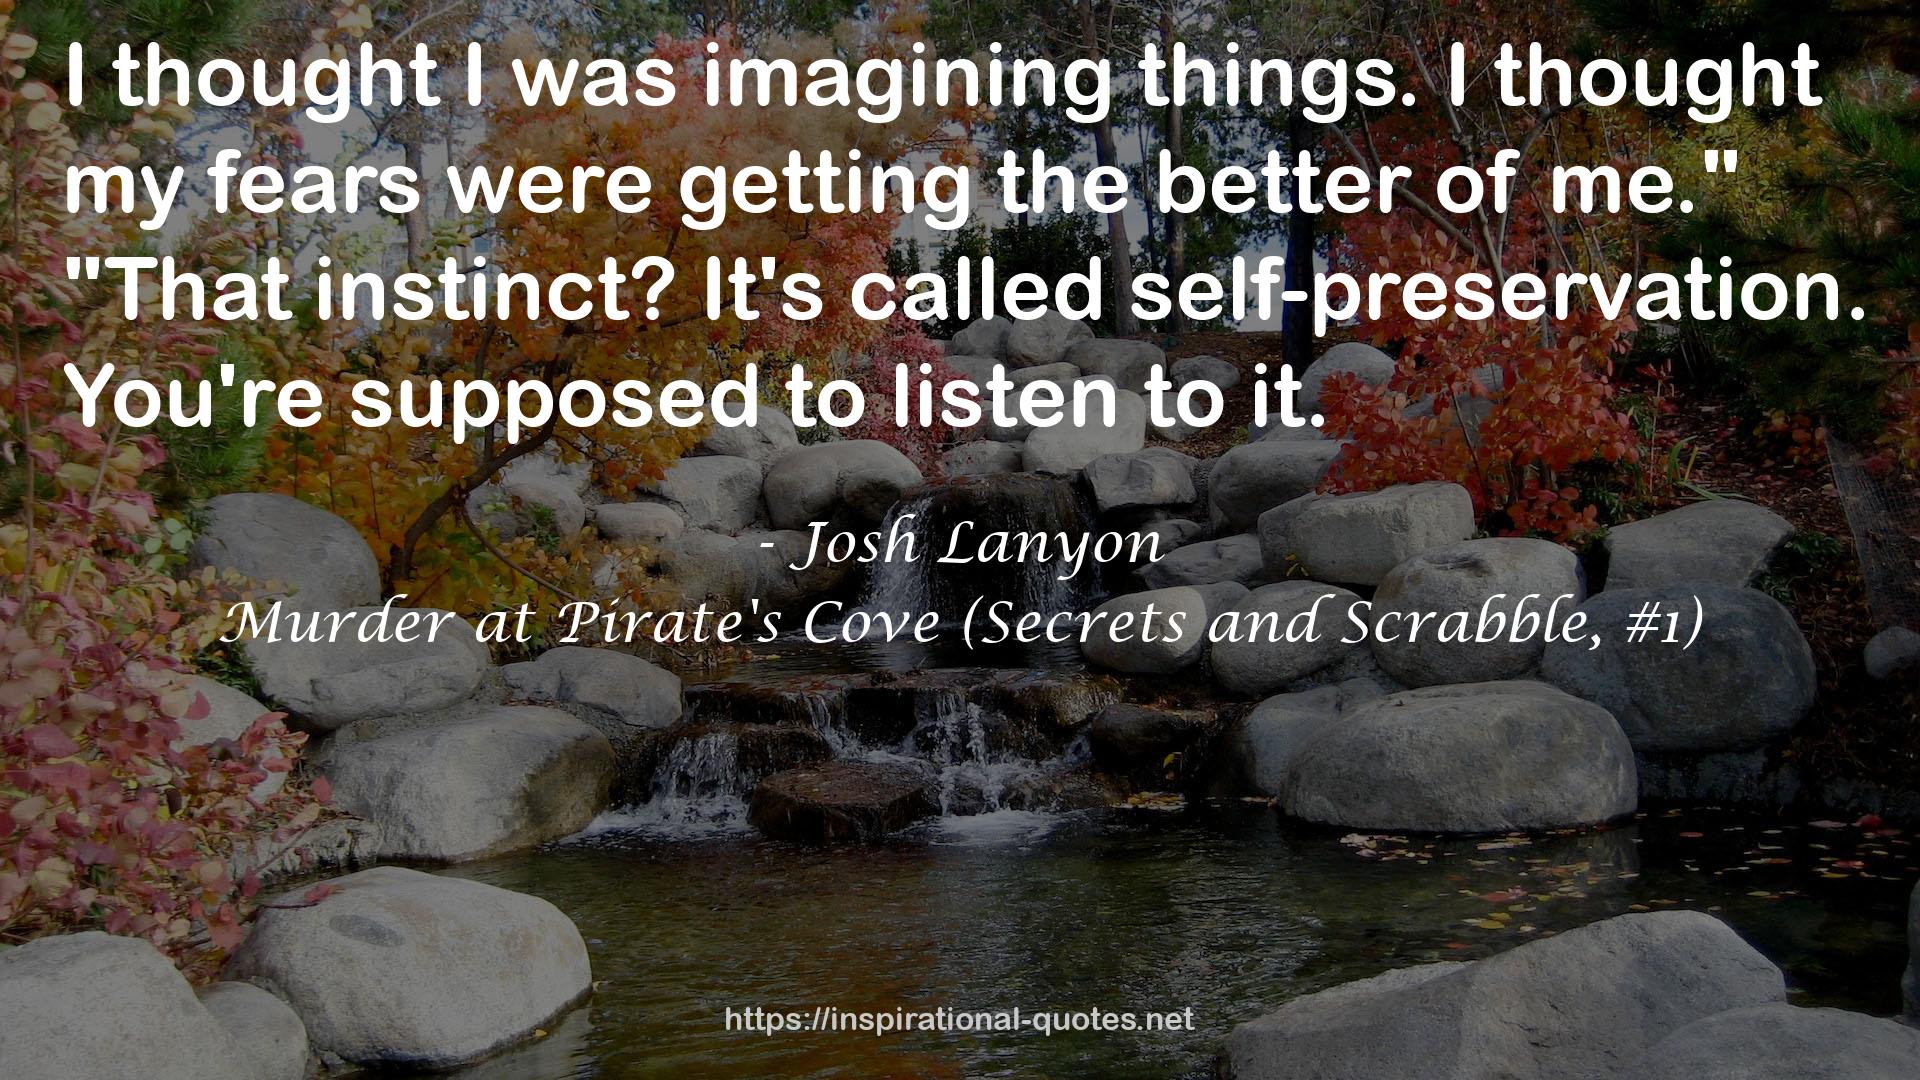 Murder at Pirate's Cove (Secrets and Scrabble, #1) QUOTES